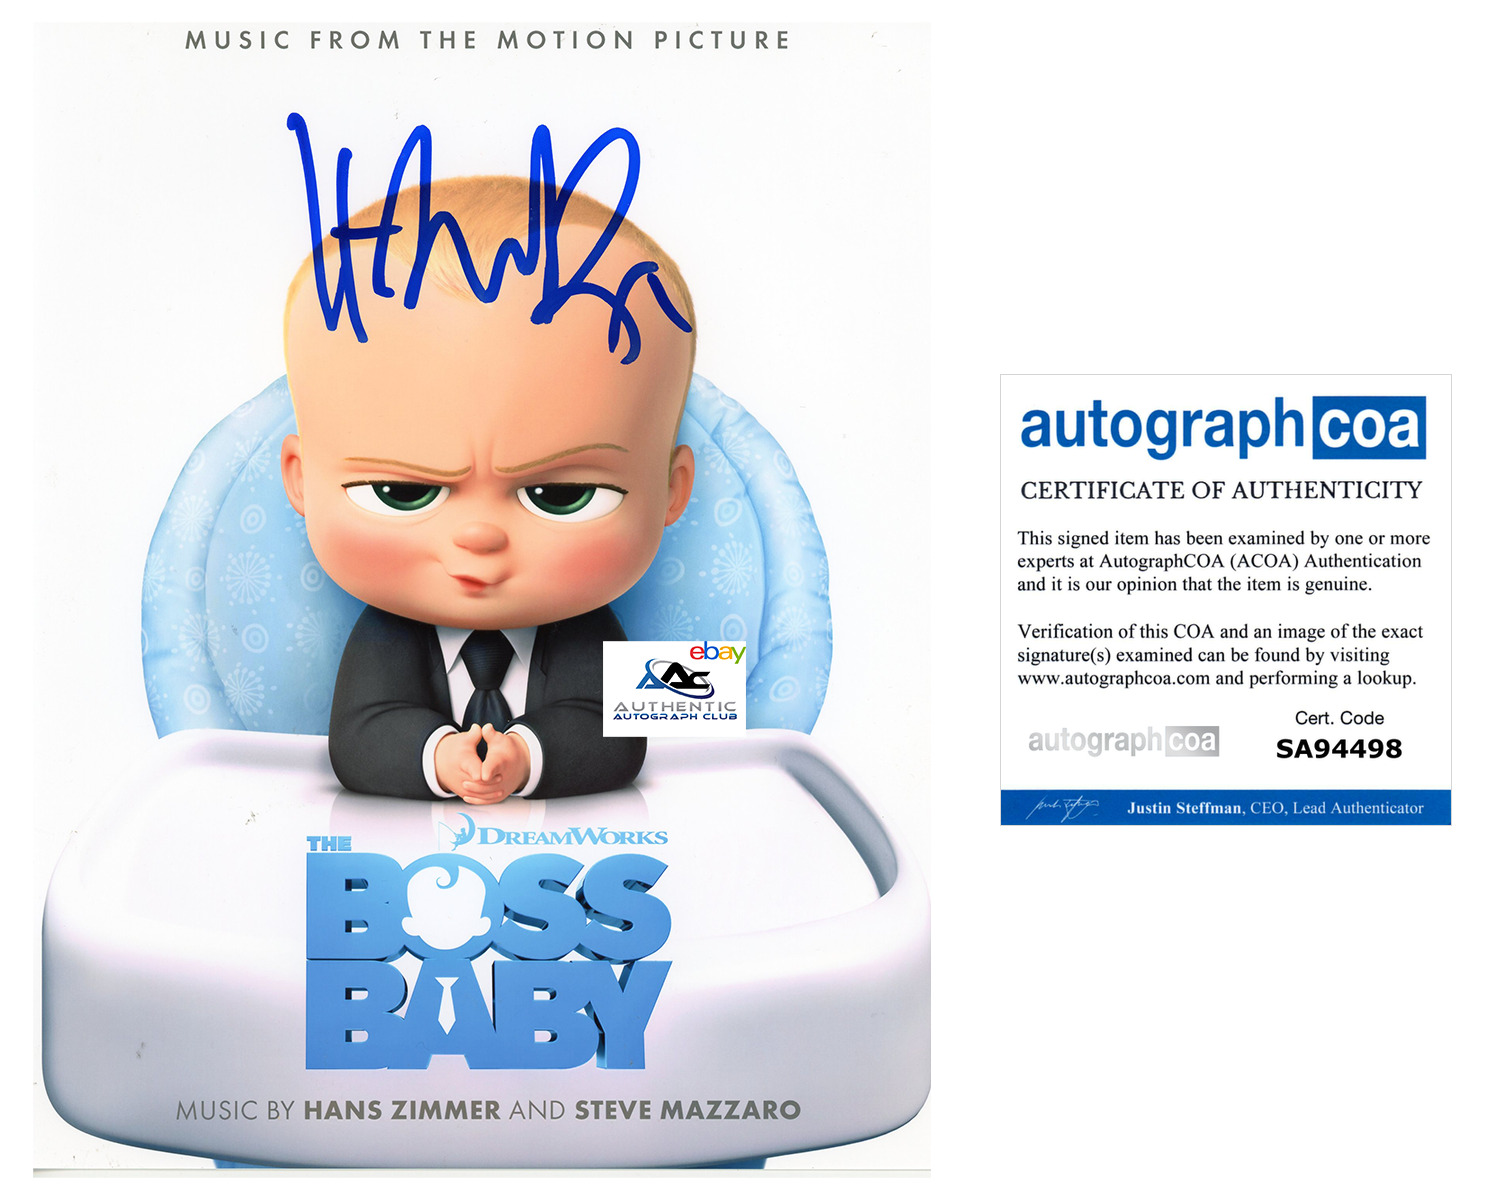 COMPOSER HANS ZIMMER AUTOGRAPH SIGNED 8x10 PHOTO BOSS BABY ACOA